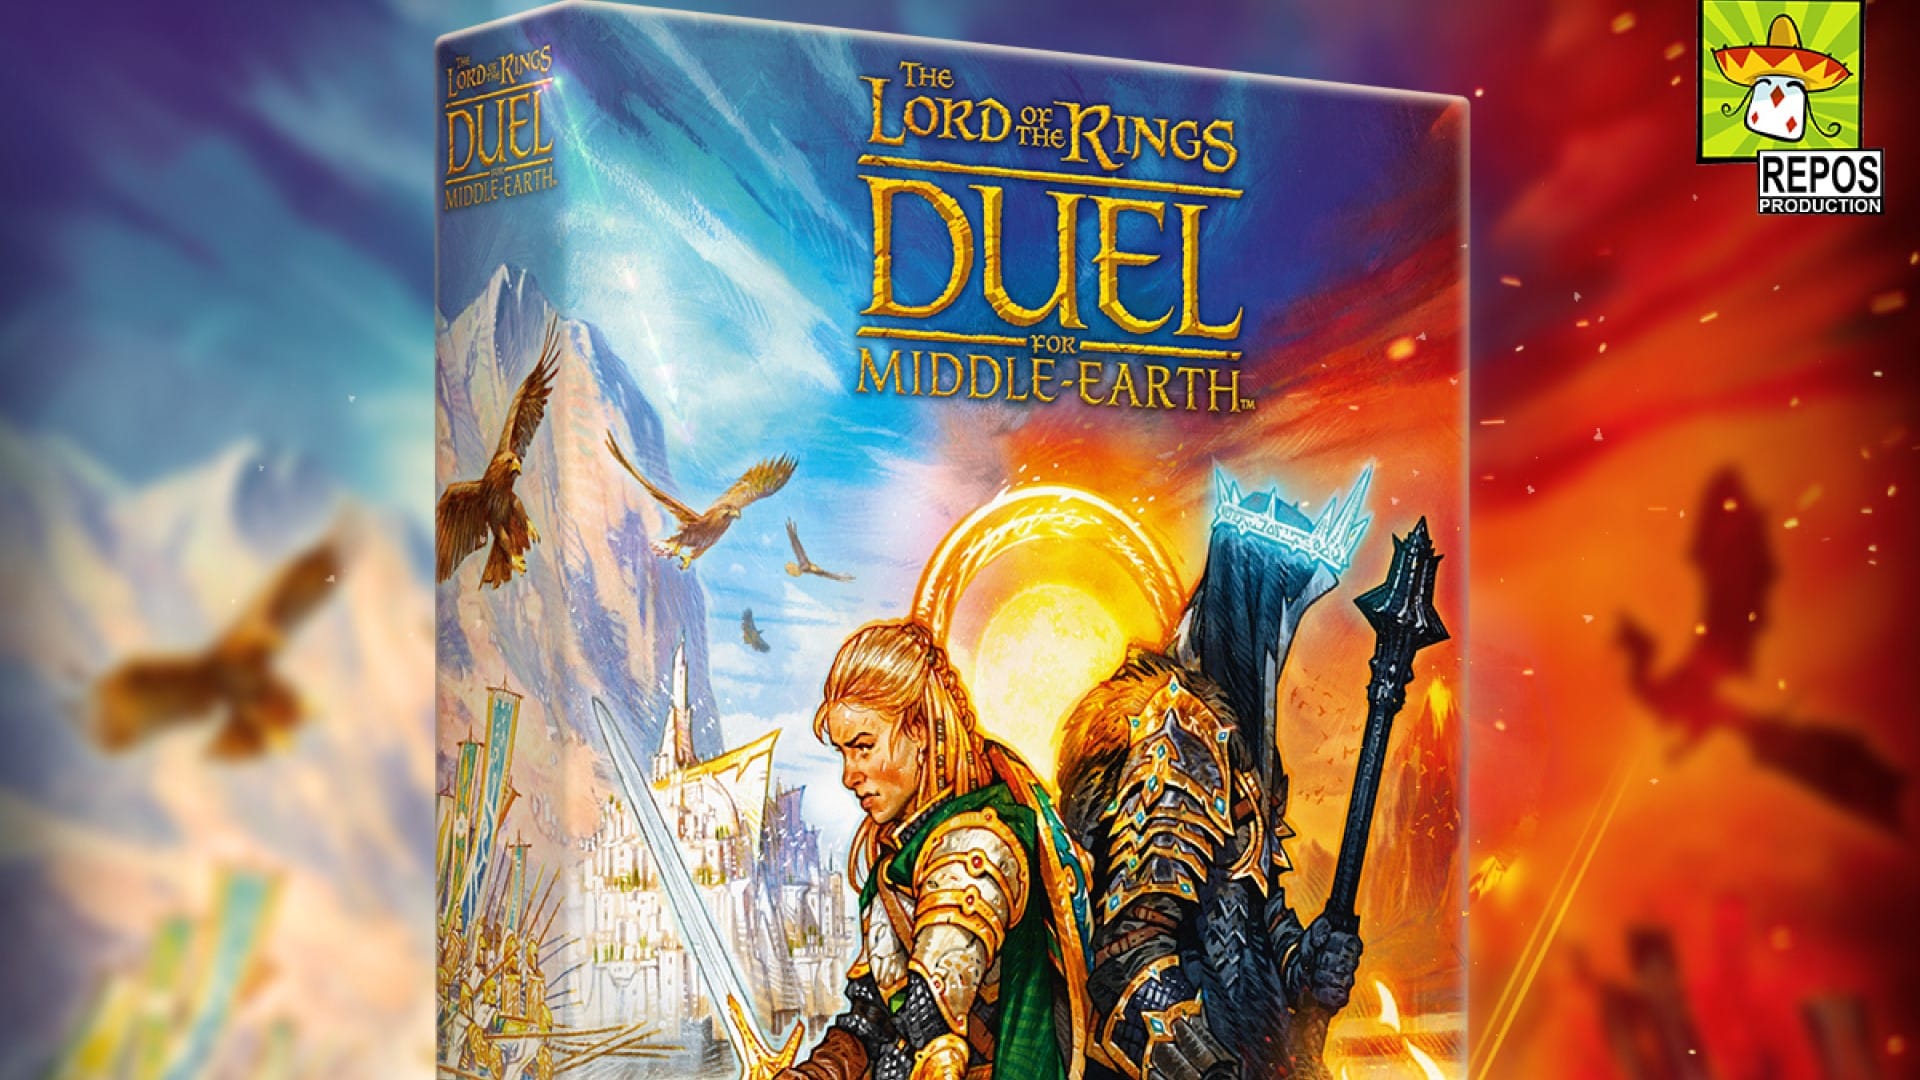 The box art of Lord of the Rings Duel for Middle-earth, showing detailed artwork of iconic characters swords drawn.